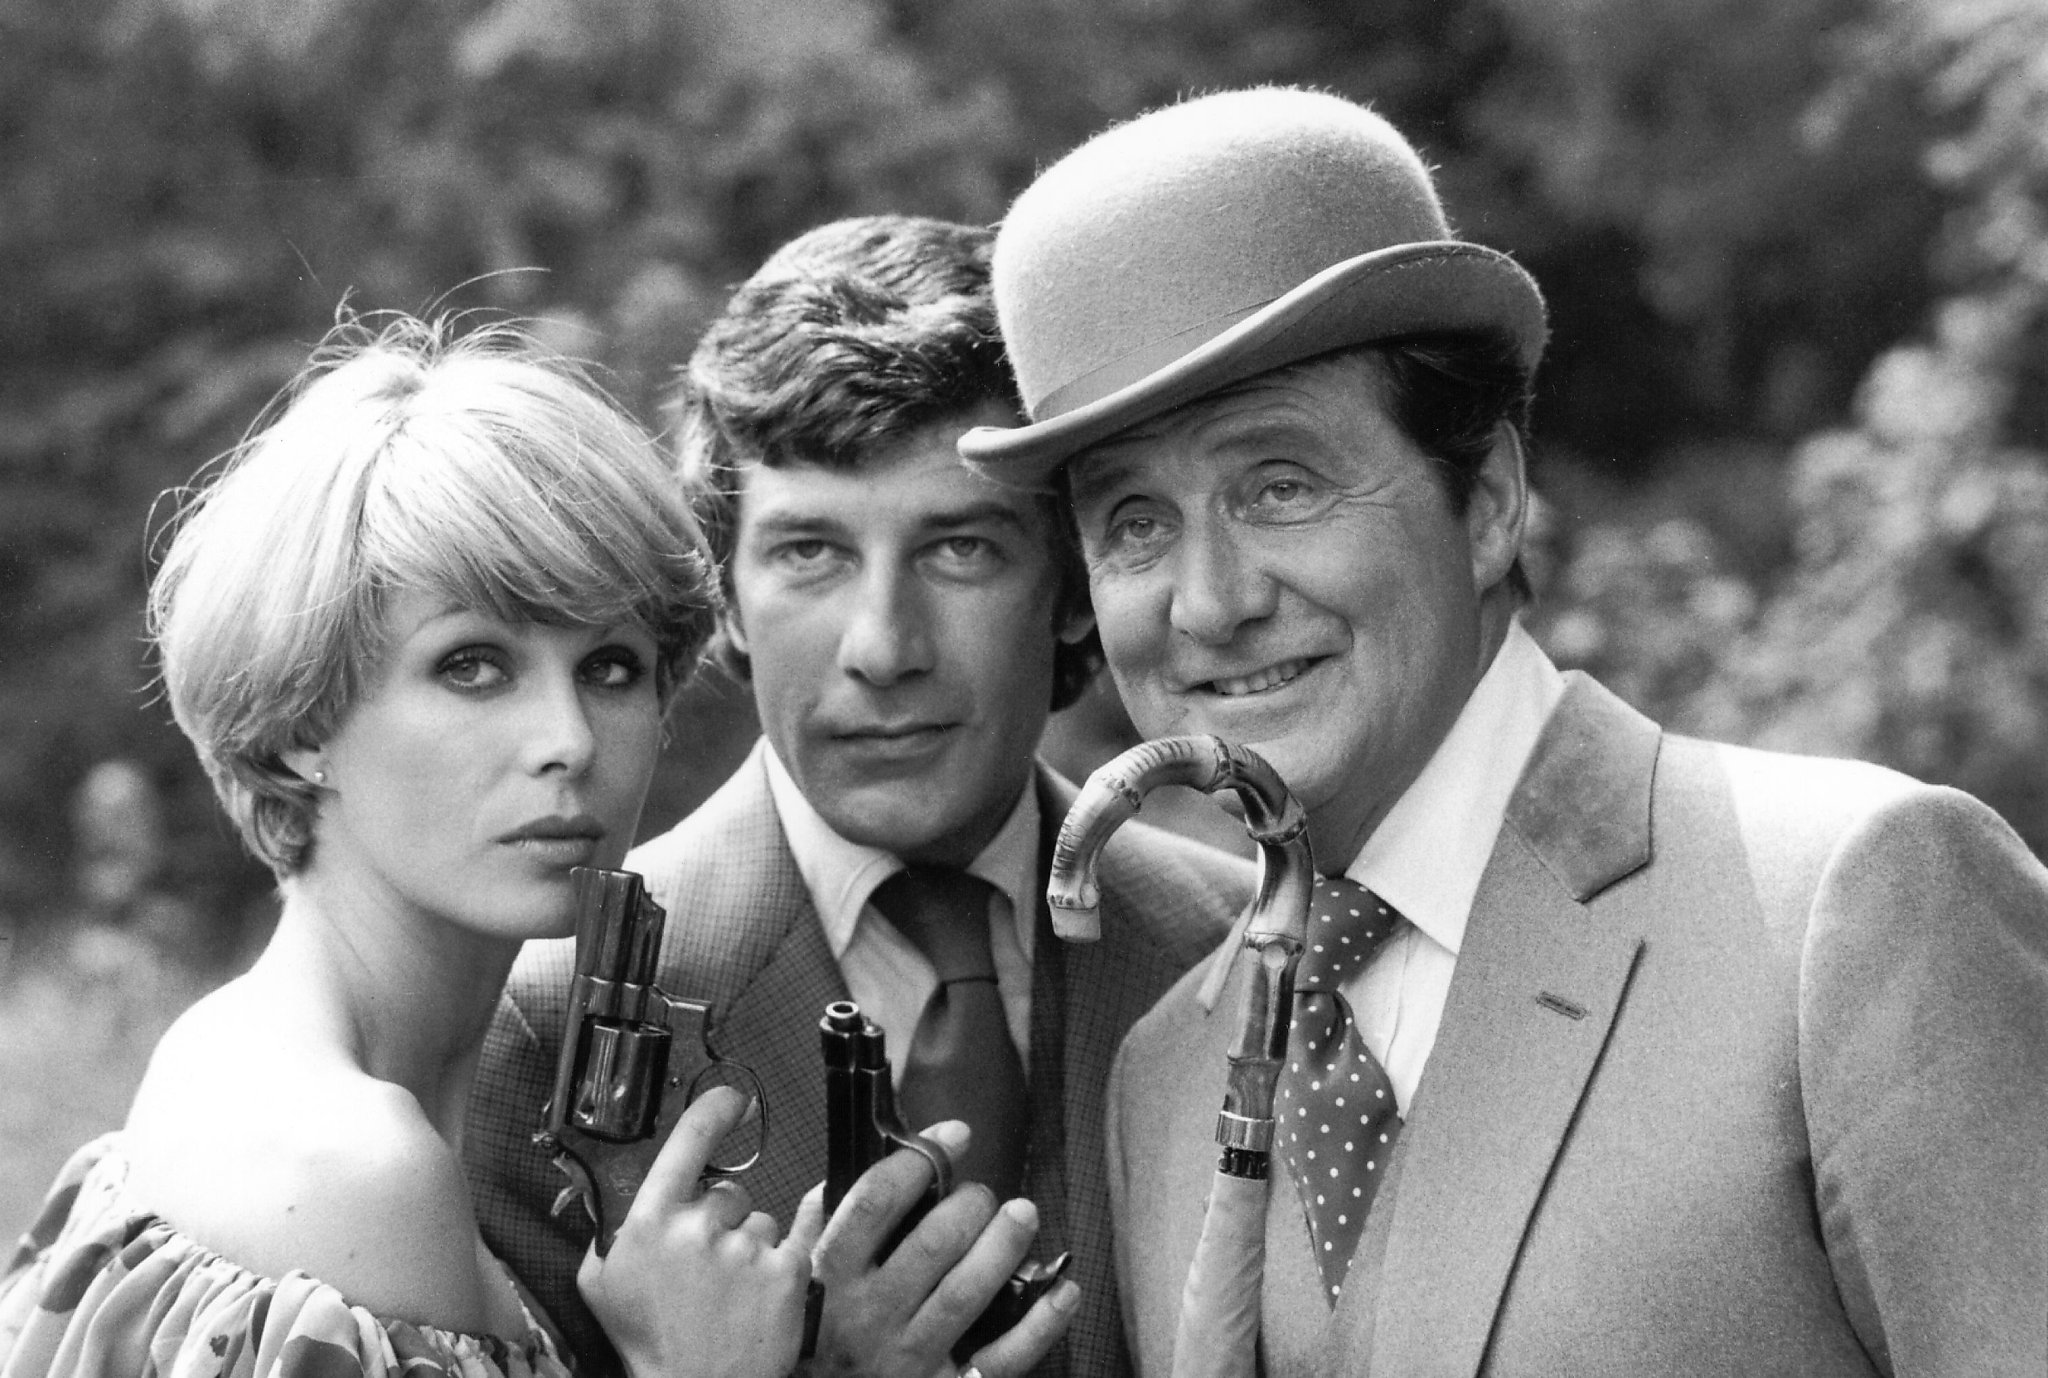 Avengers Porn Romano - Patrick Macnee, actor best known for TV hit 'The Avengers,' dies